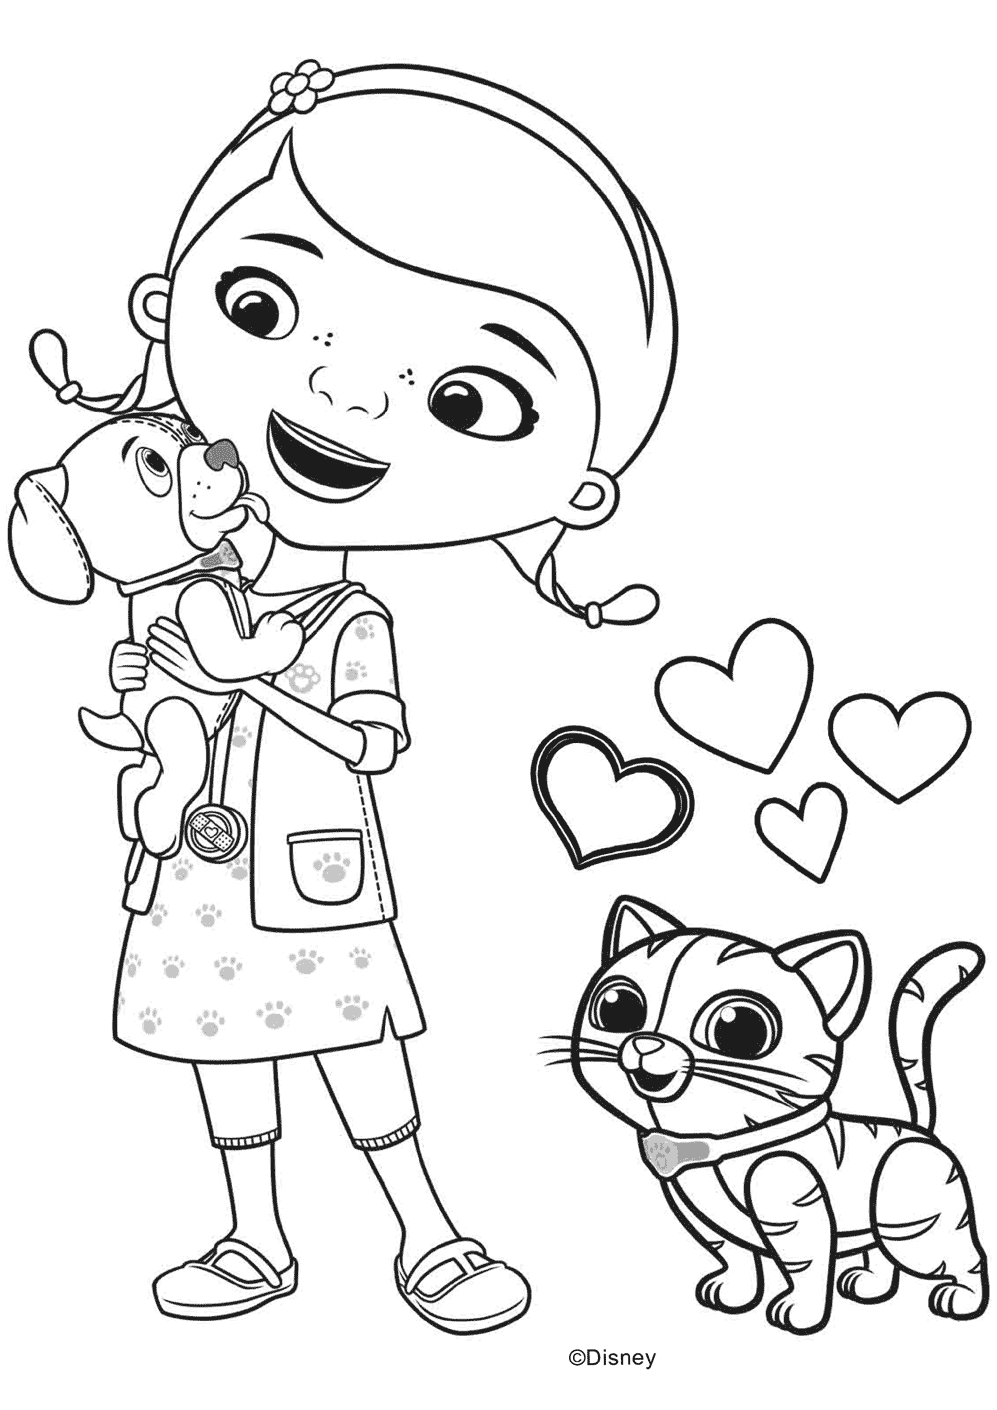 Free Printable Doc Mcstuffins Coloring Pages Pdf - Doc Mcstuffins With Findo And Whispers Coloring Page